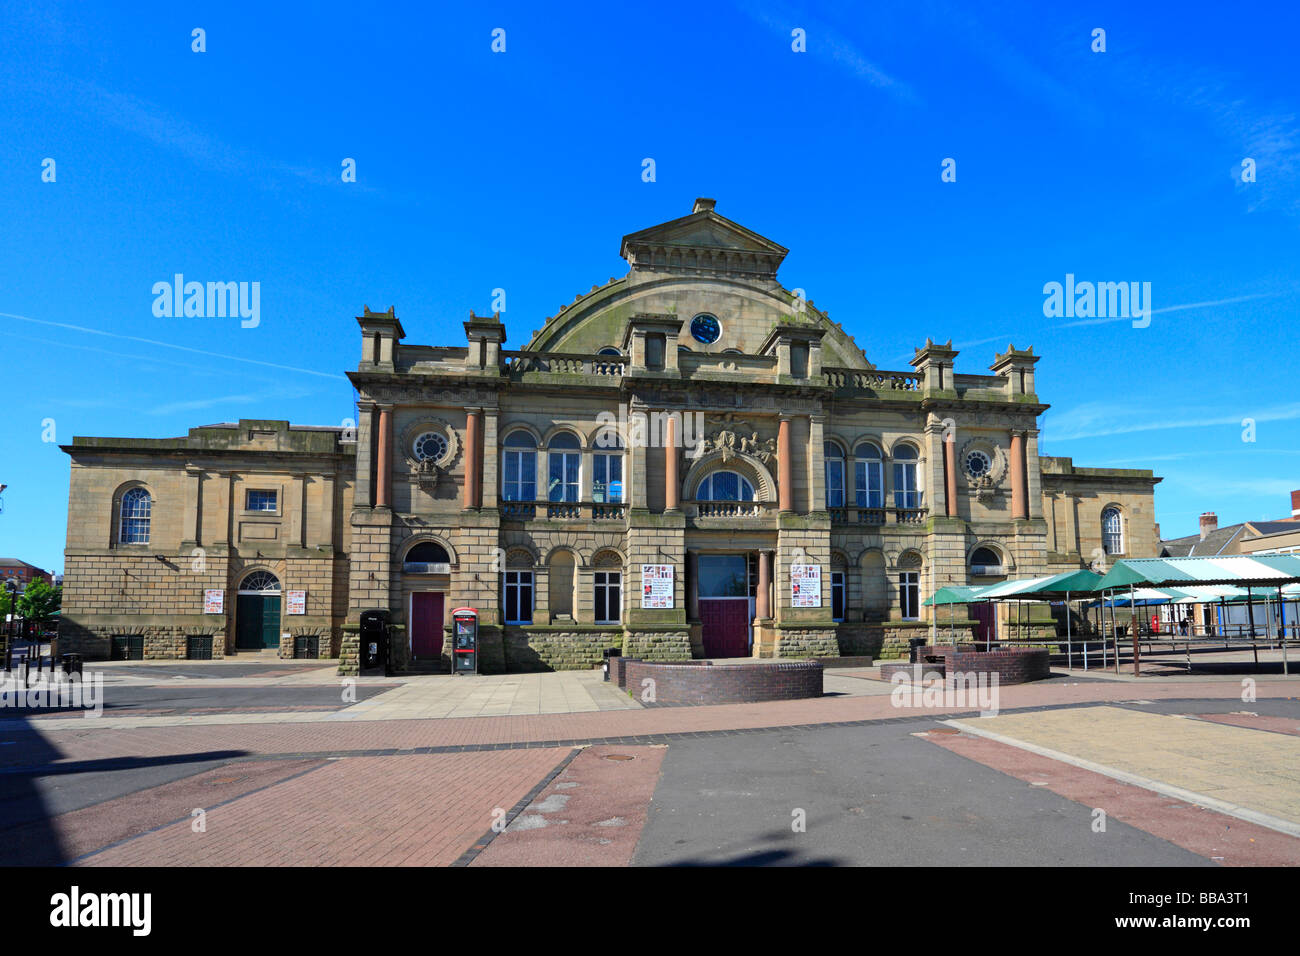 Die Corn Exchange, Doncaster, South Yorkshire, England, UK. Stockfoto